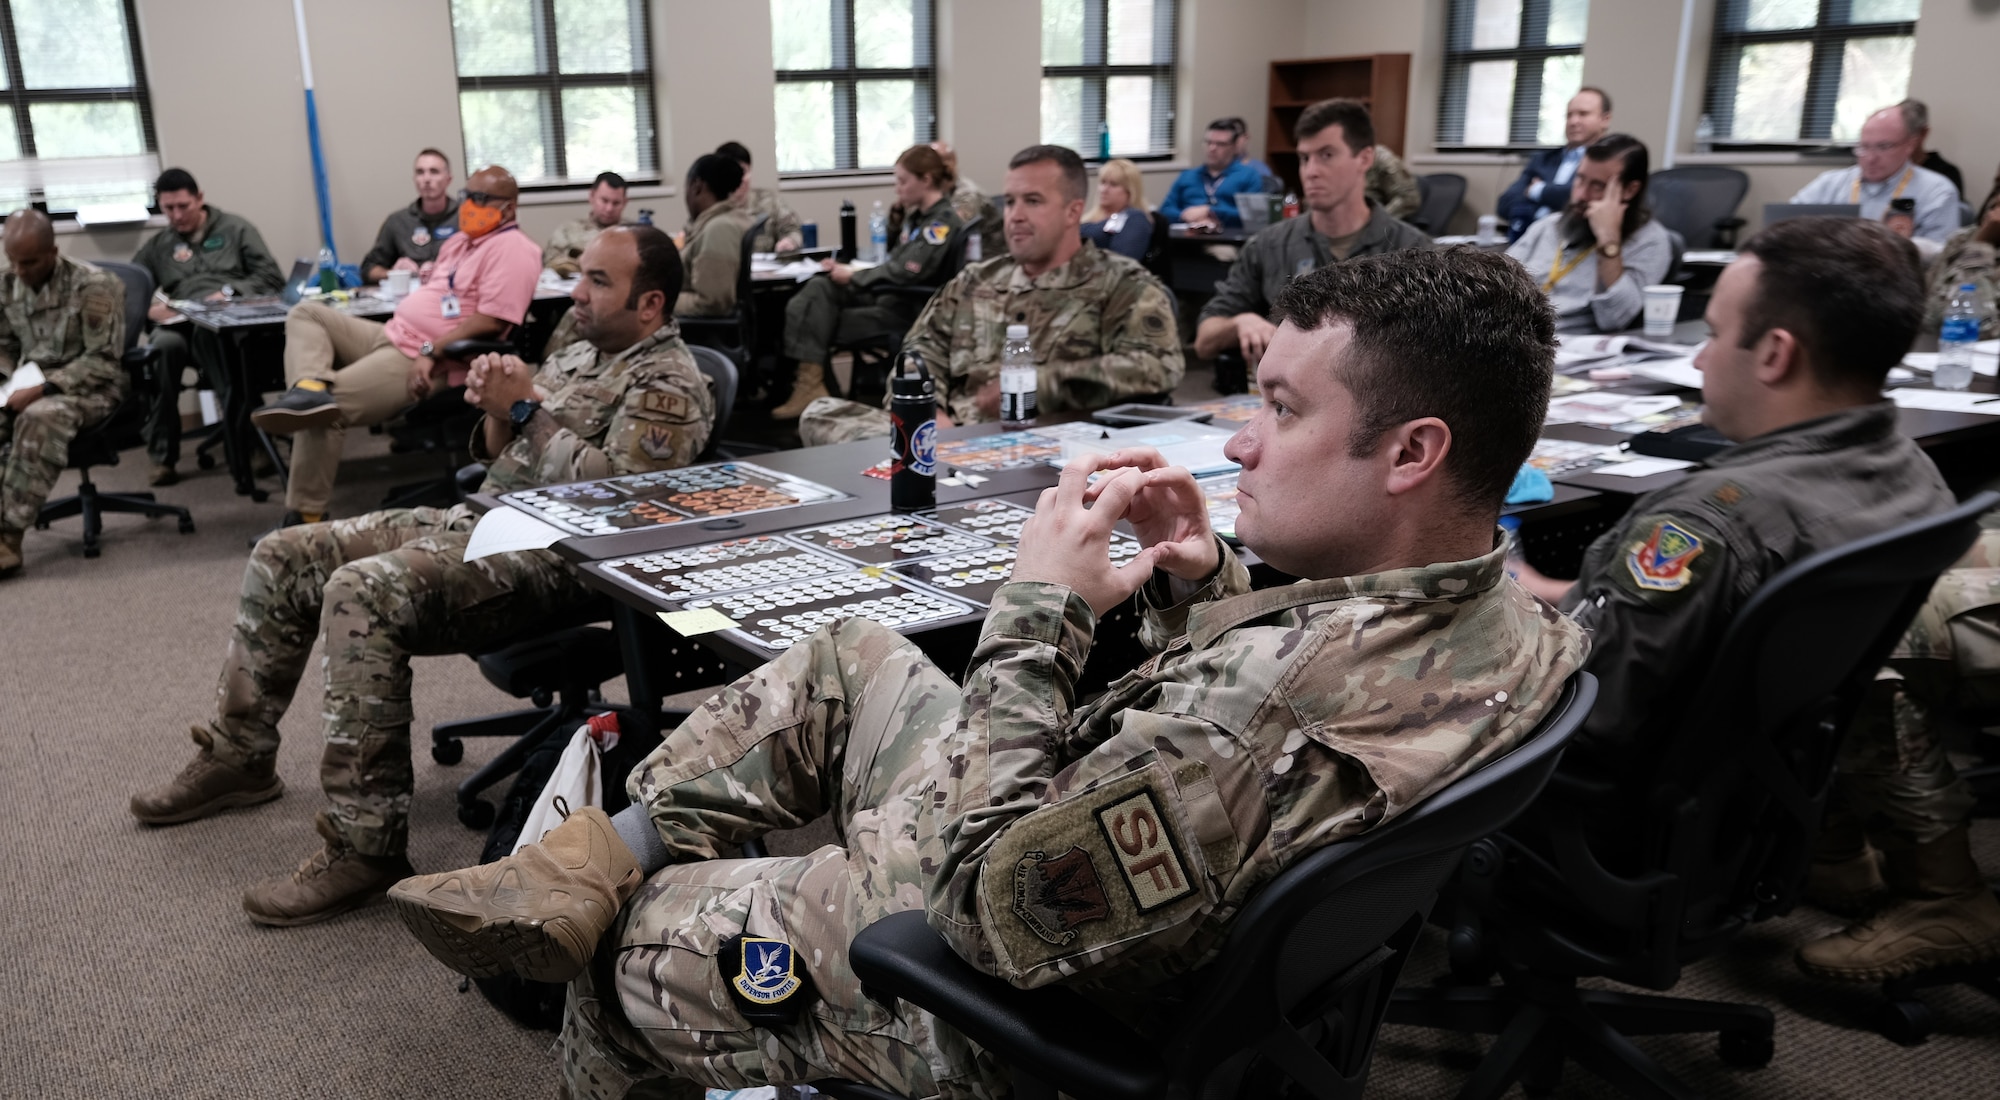 photo of a group of US Military sitting in a room at tables